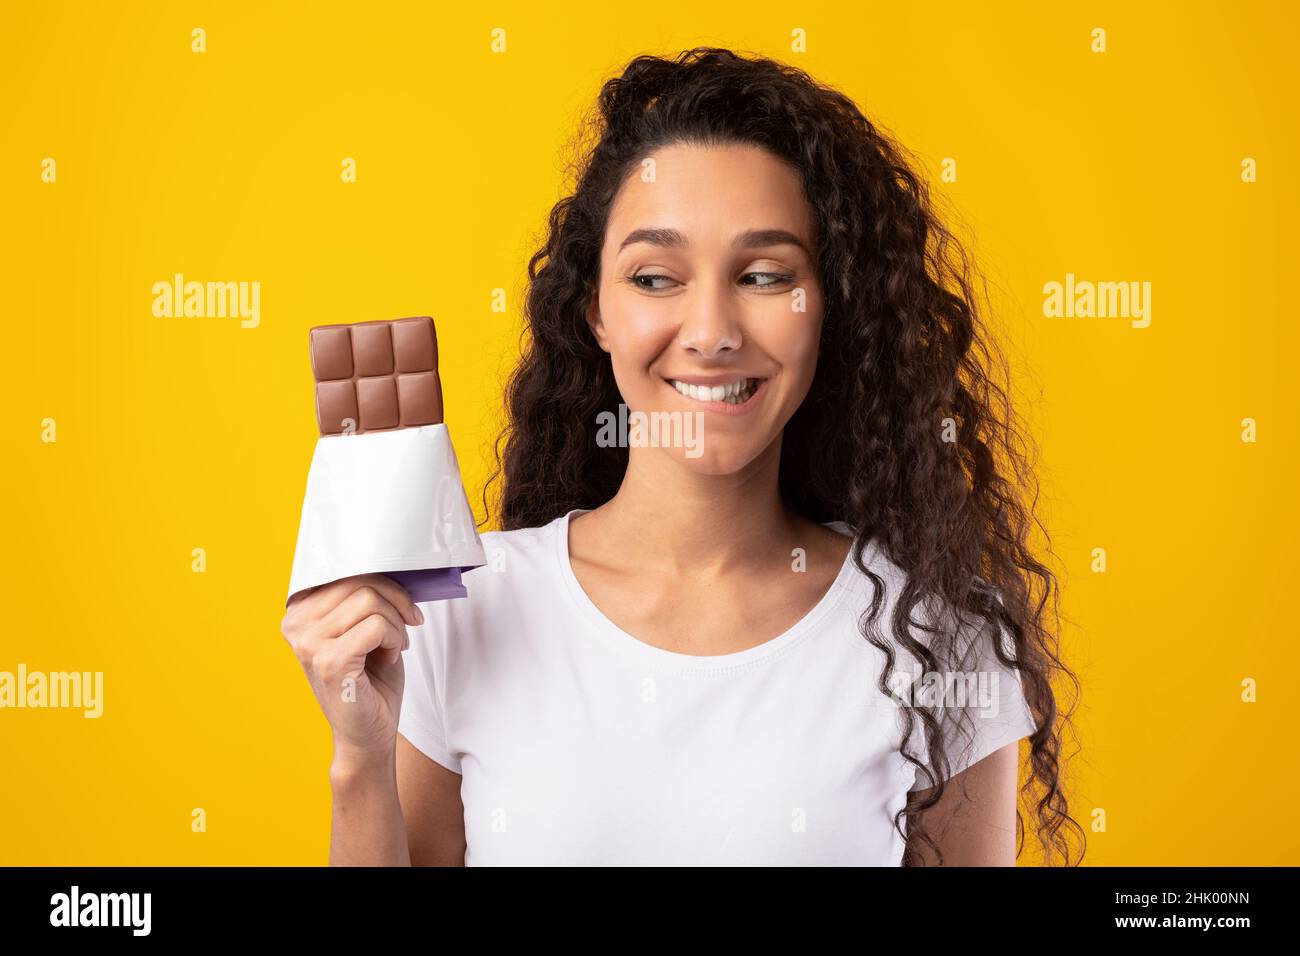 Funny Hungry Lady Holding Chocolate At Studio Stock Photo